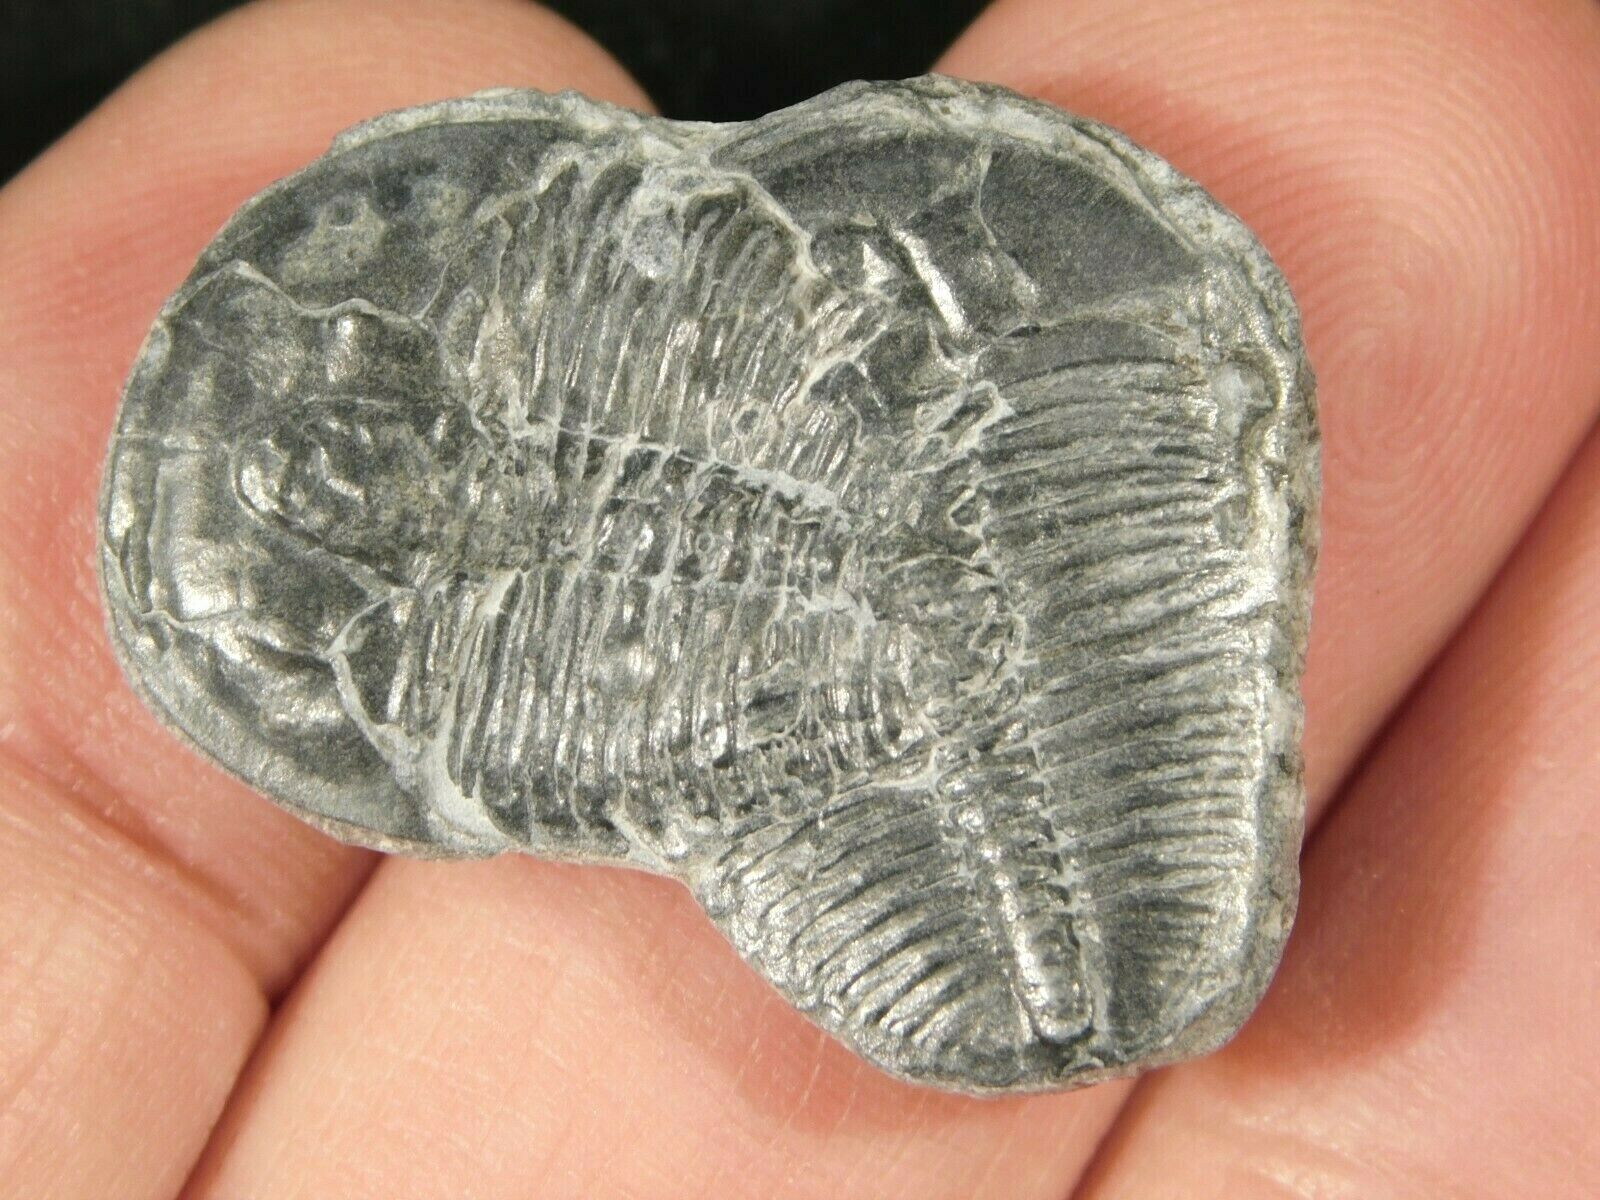 Two! Entwined Elrathia Trilobite Fossils From Utah 3.47